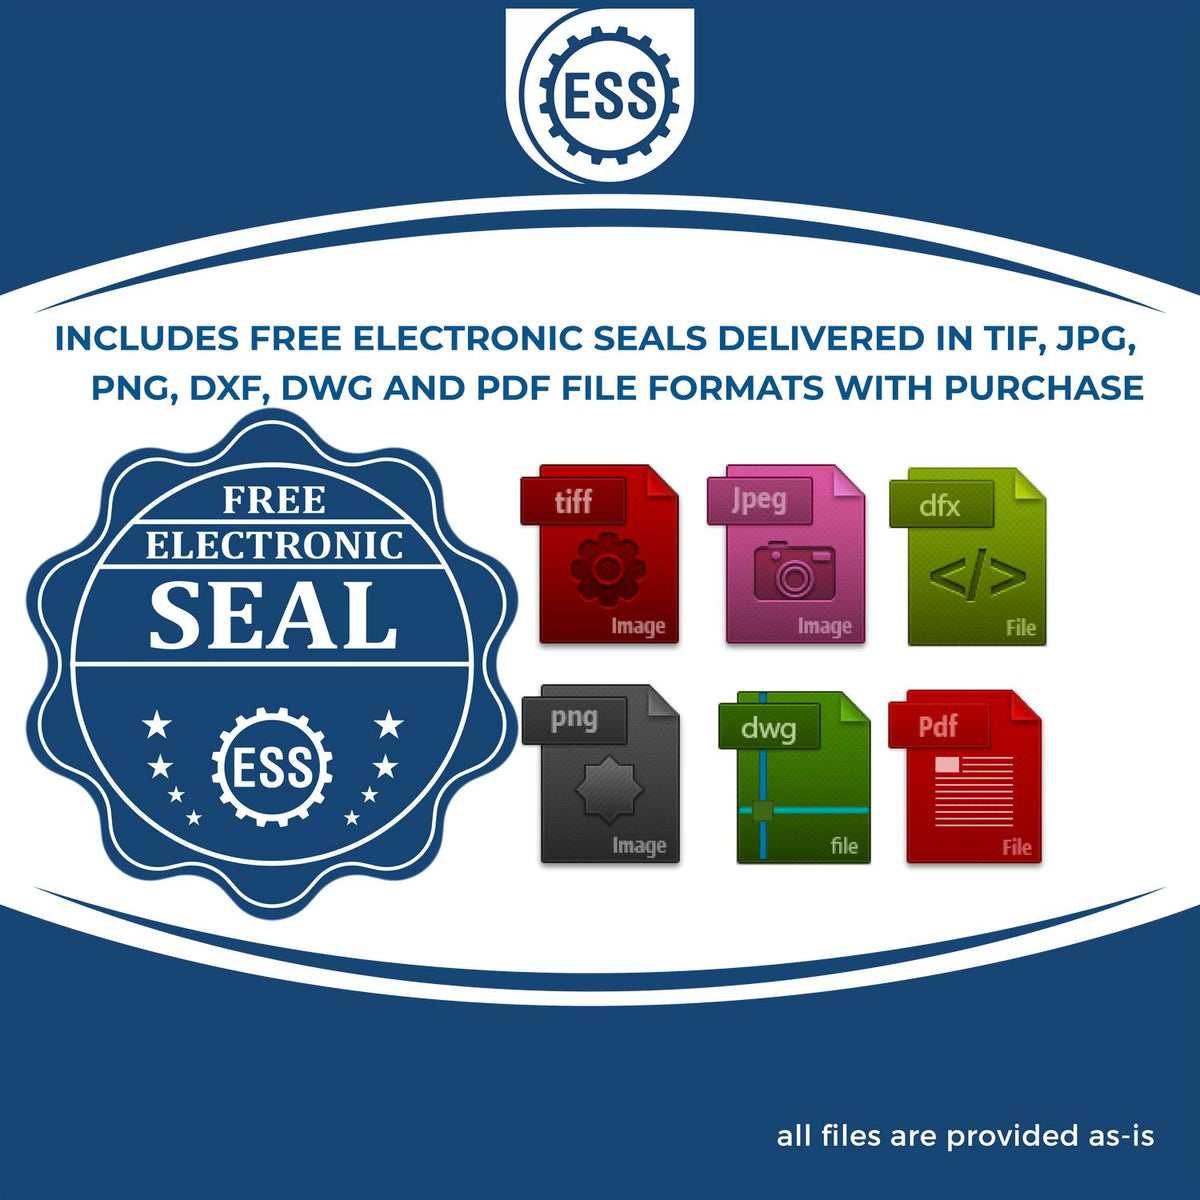 An infographic for the free electronic seal for the Slim Pre-Inked Virginia Landscape Architect Seal Stamp illustrating the different file type icons such as DXF, DWG, TIF, JPG and PNG.